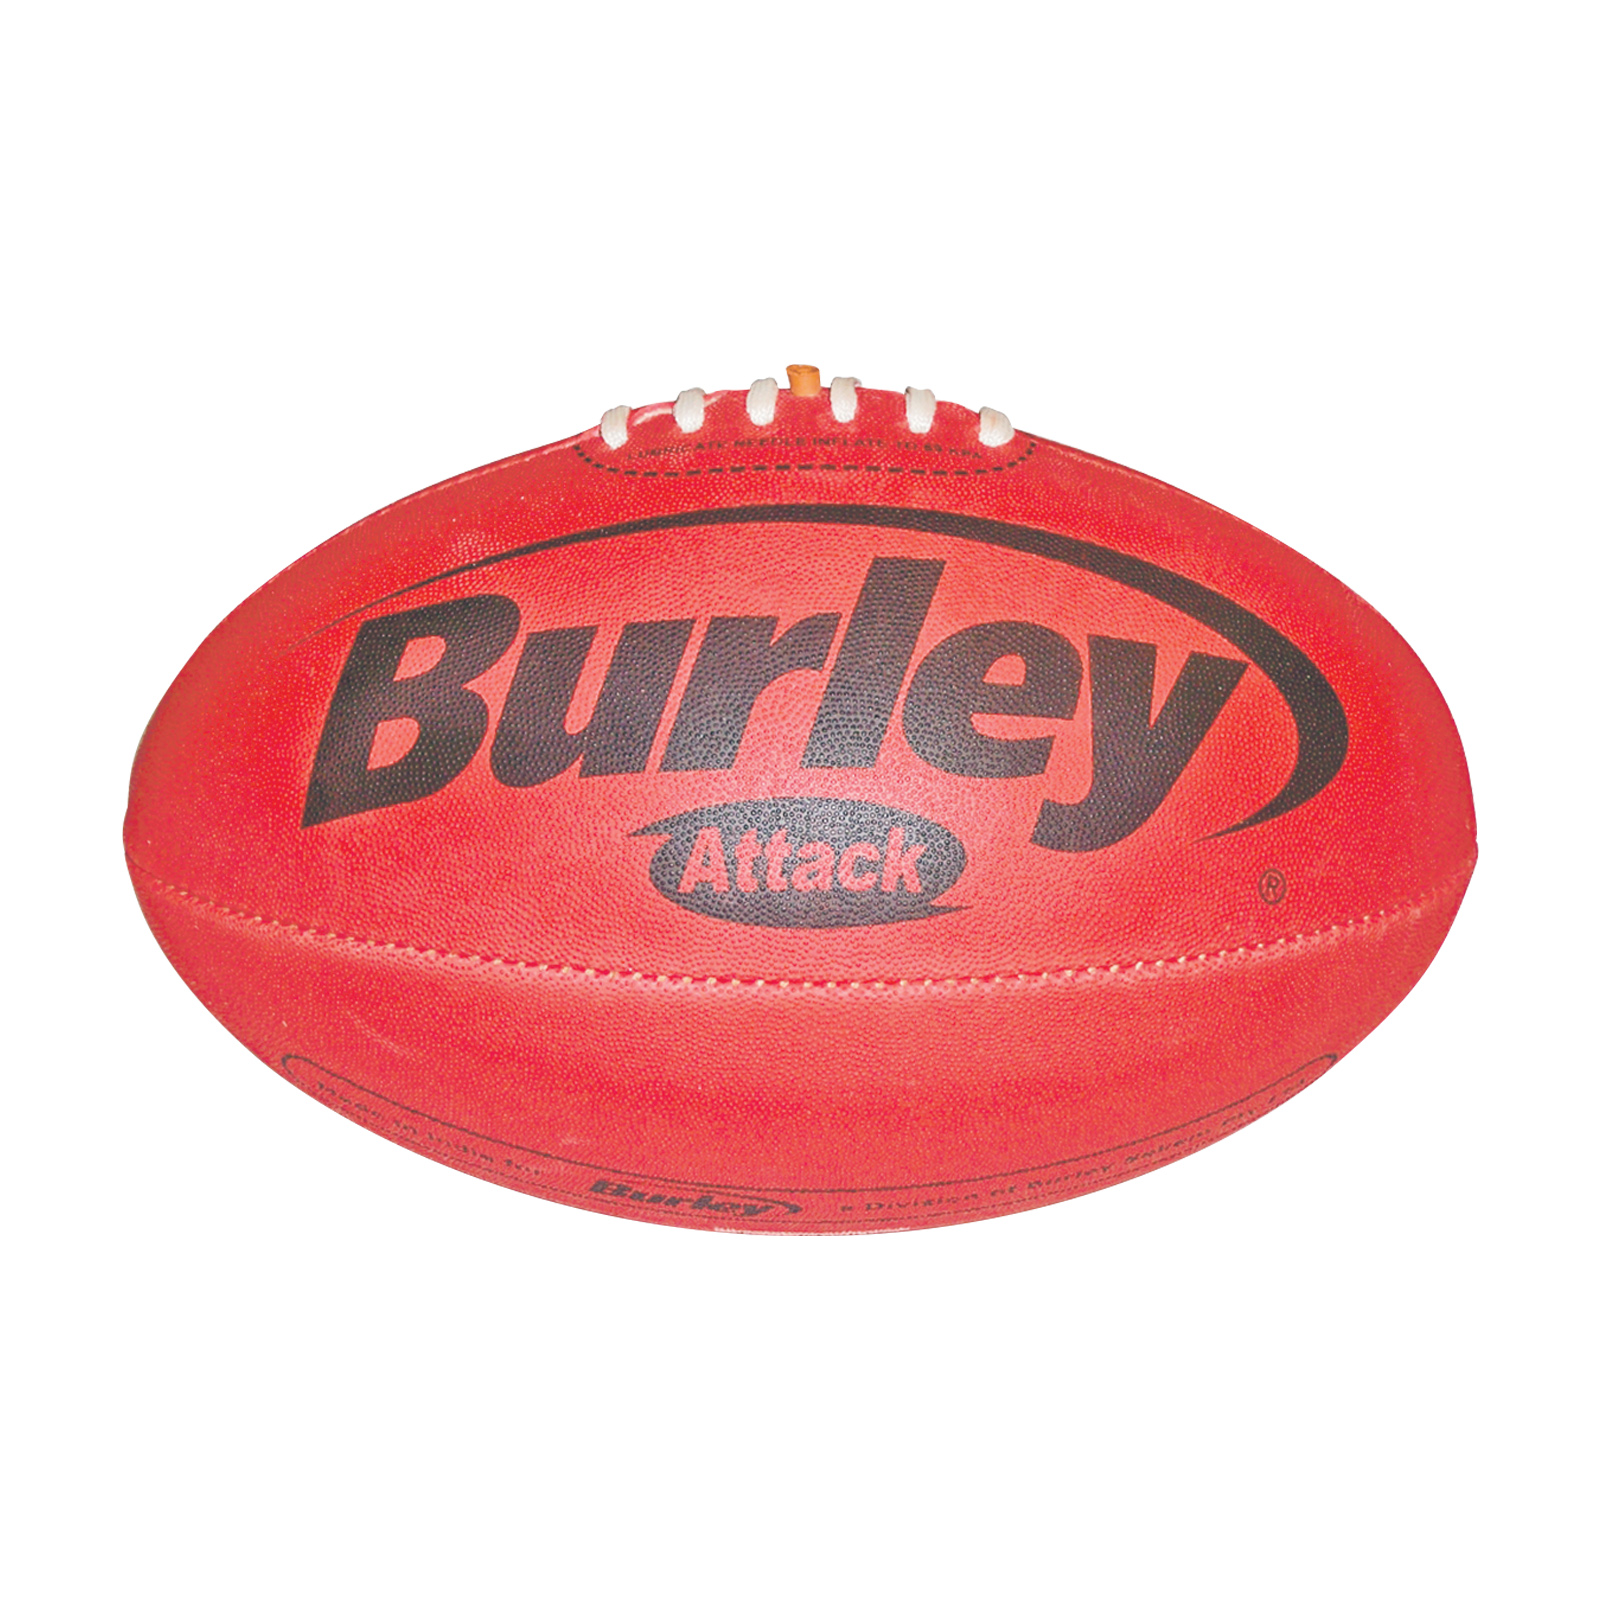 Burley Attack Football Size 4